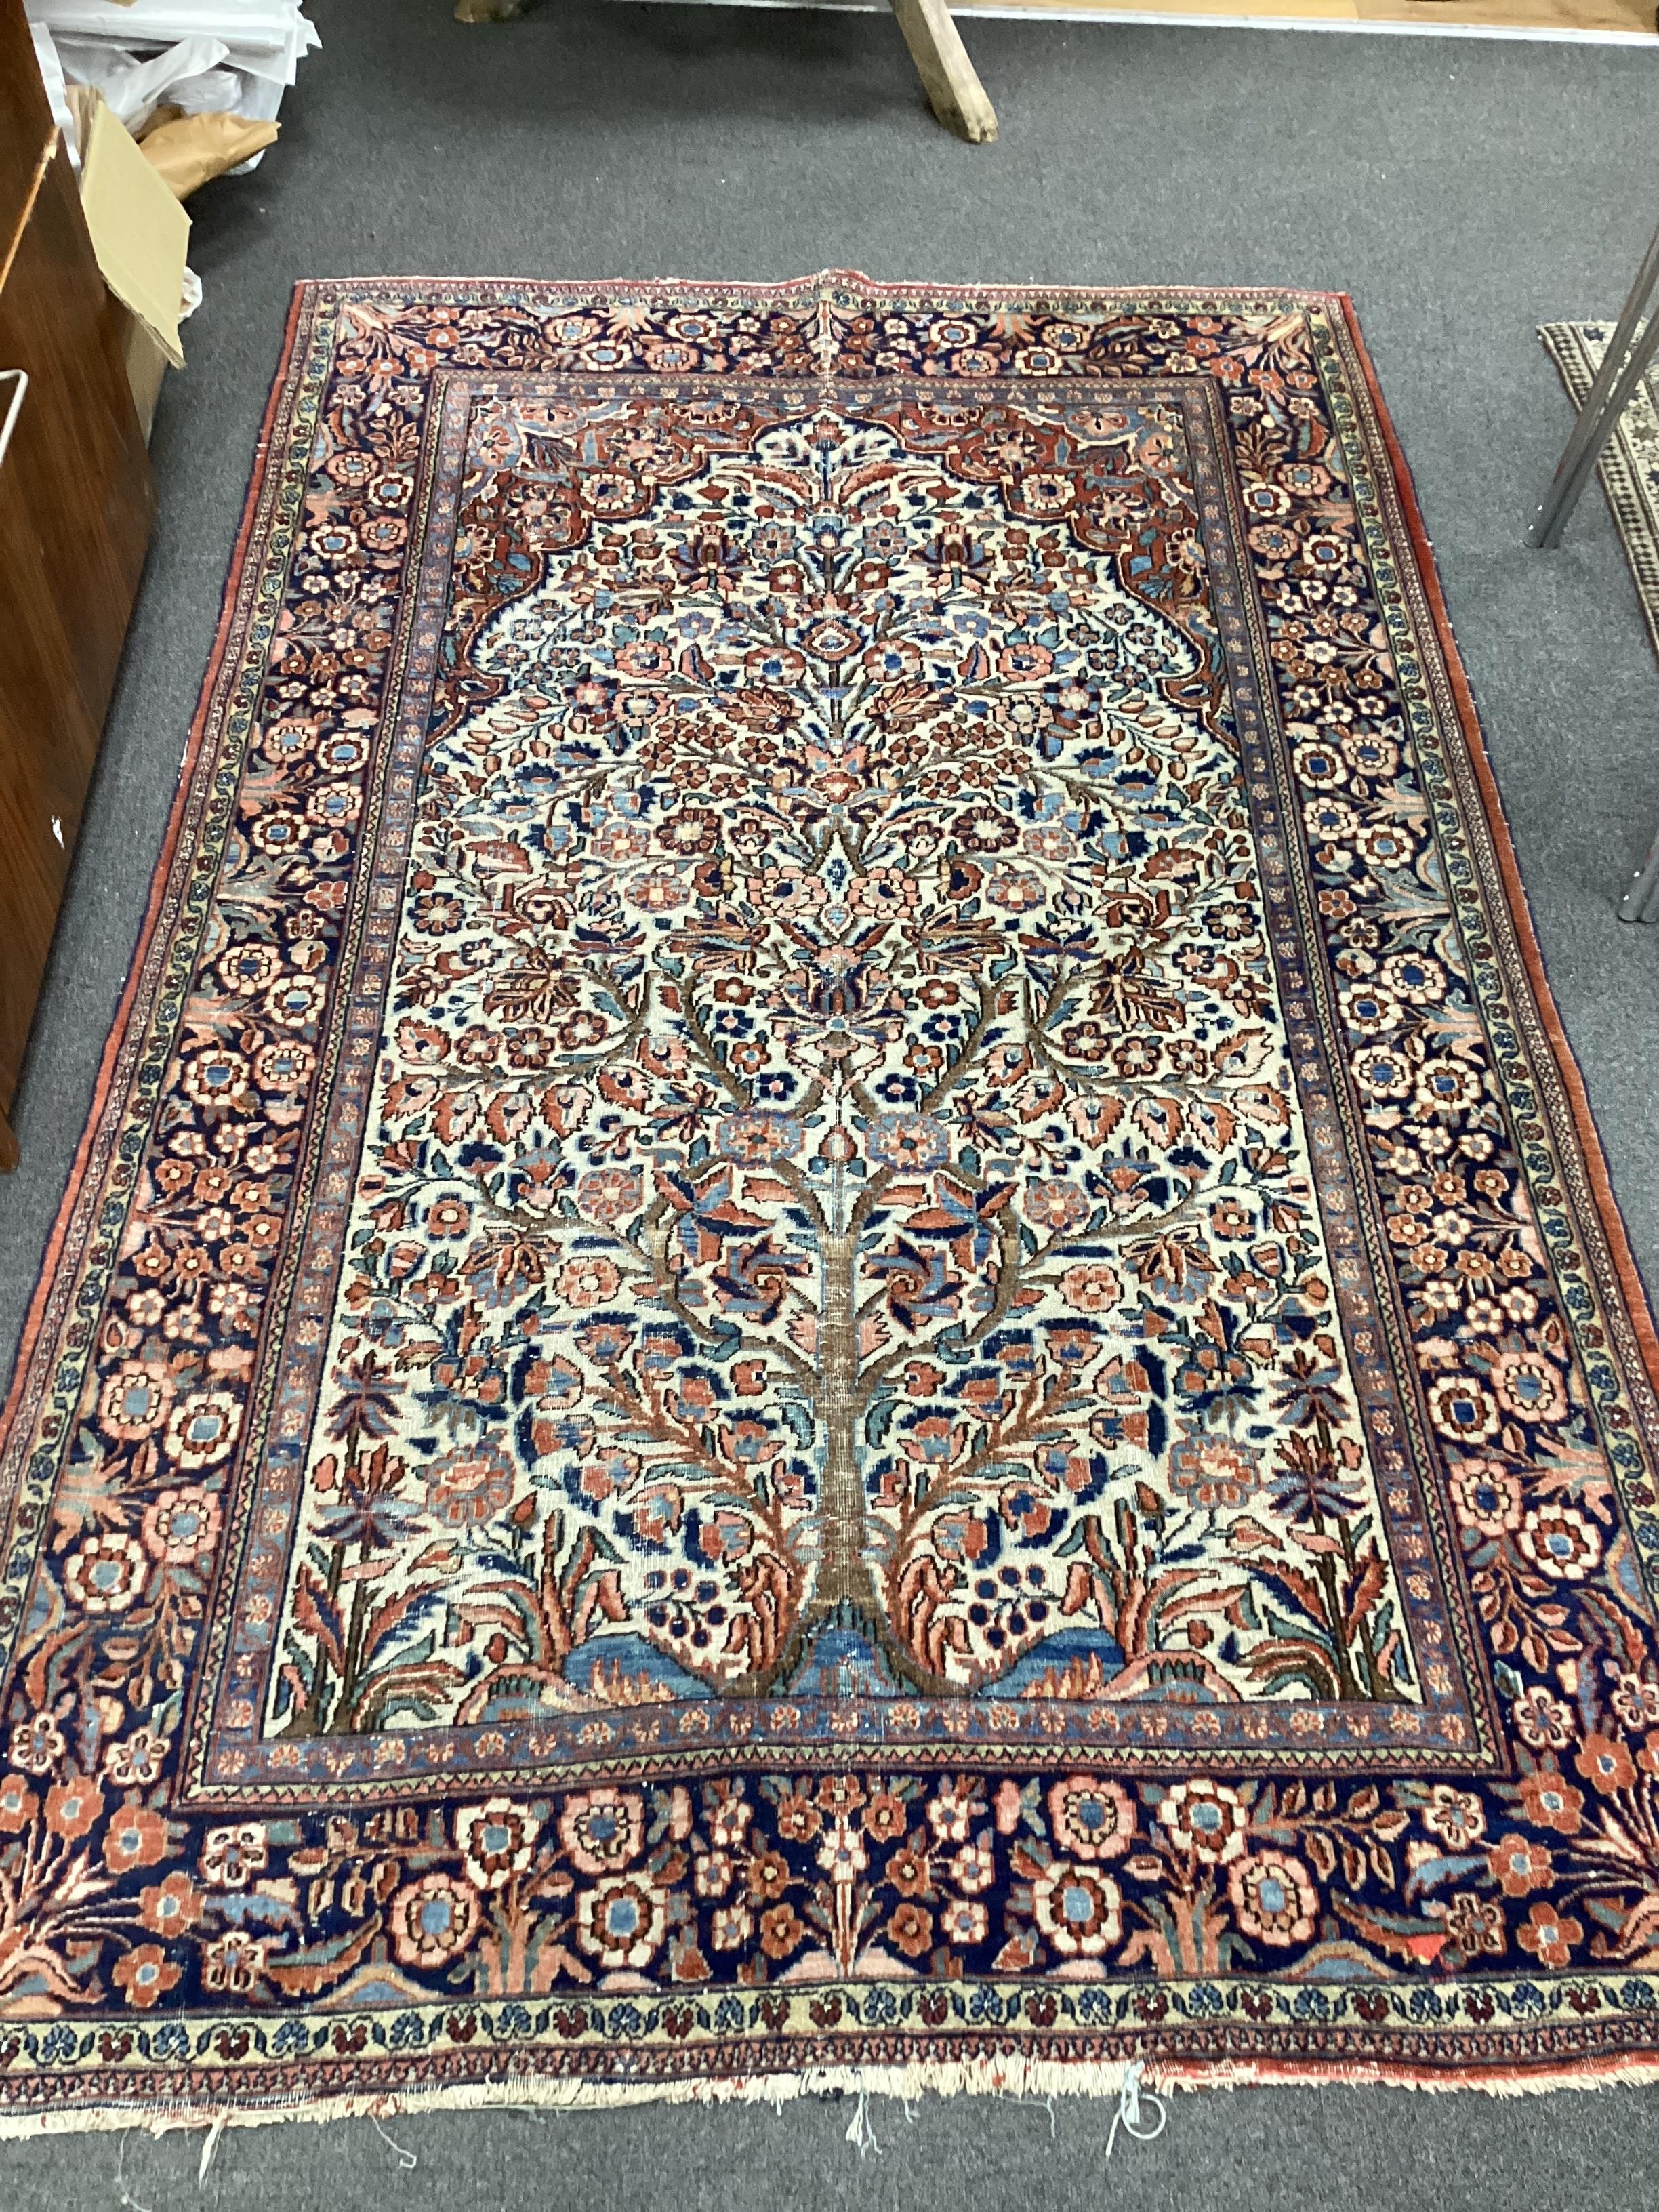 A North West Persian ivory ground rug, a Kuba blue ground rug and a Karabagh type Boteh rug, largest 210 x 136cm                                                                                                            